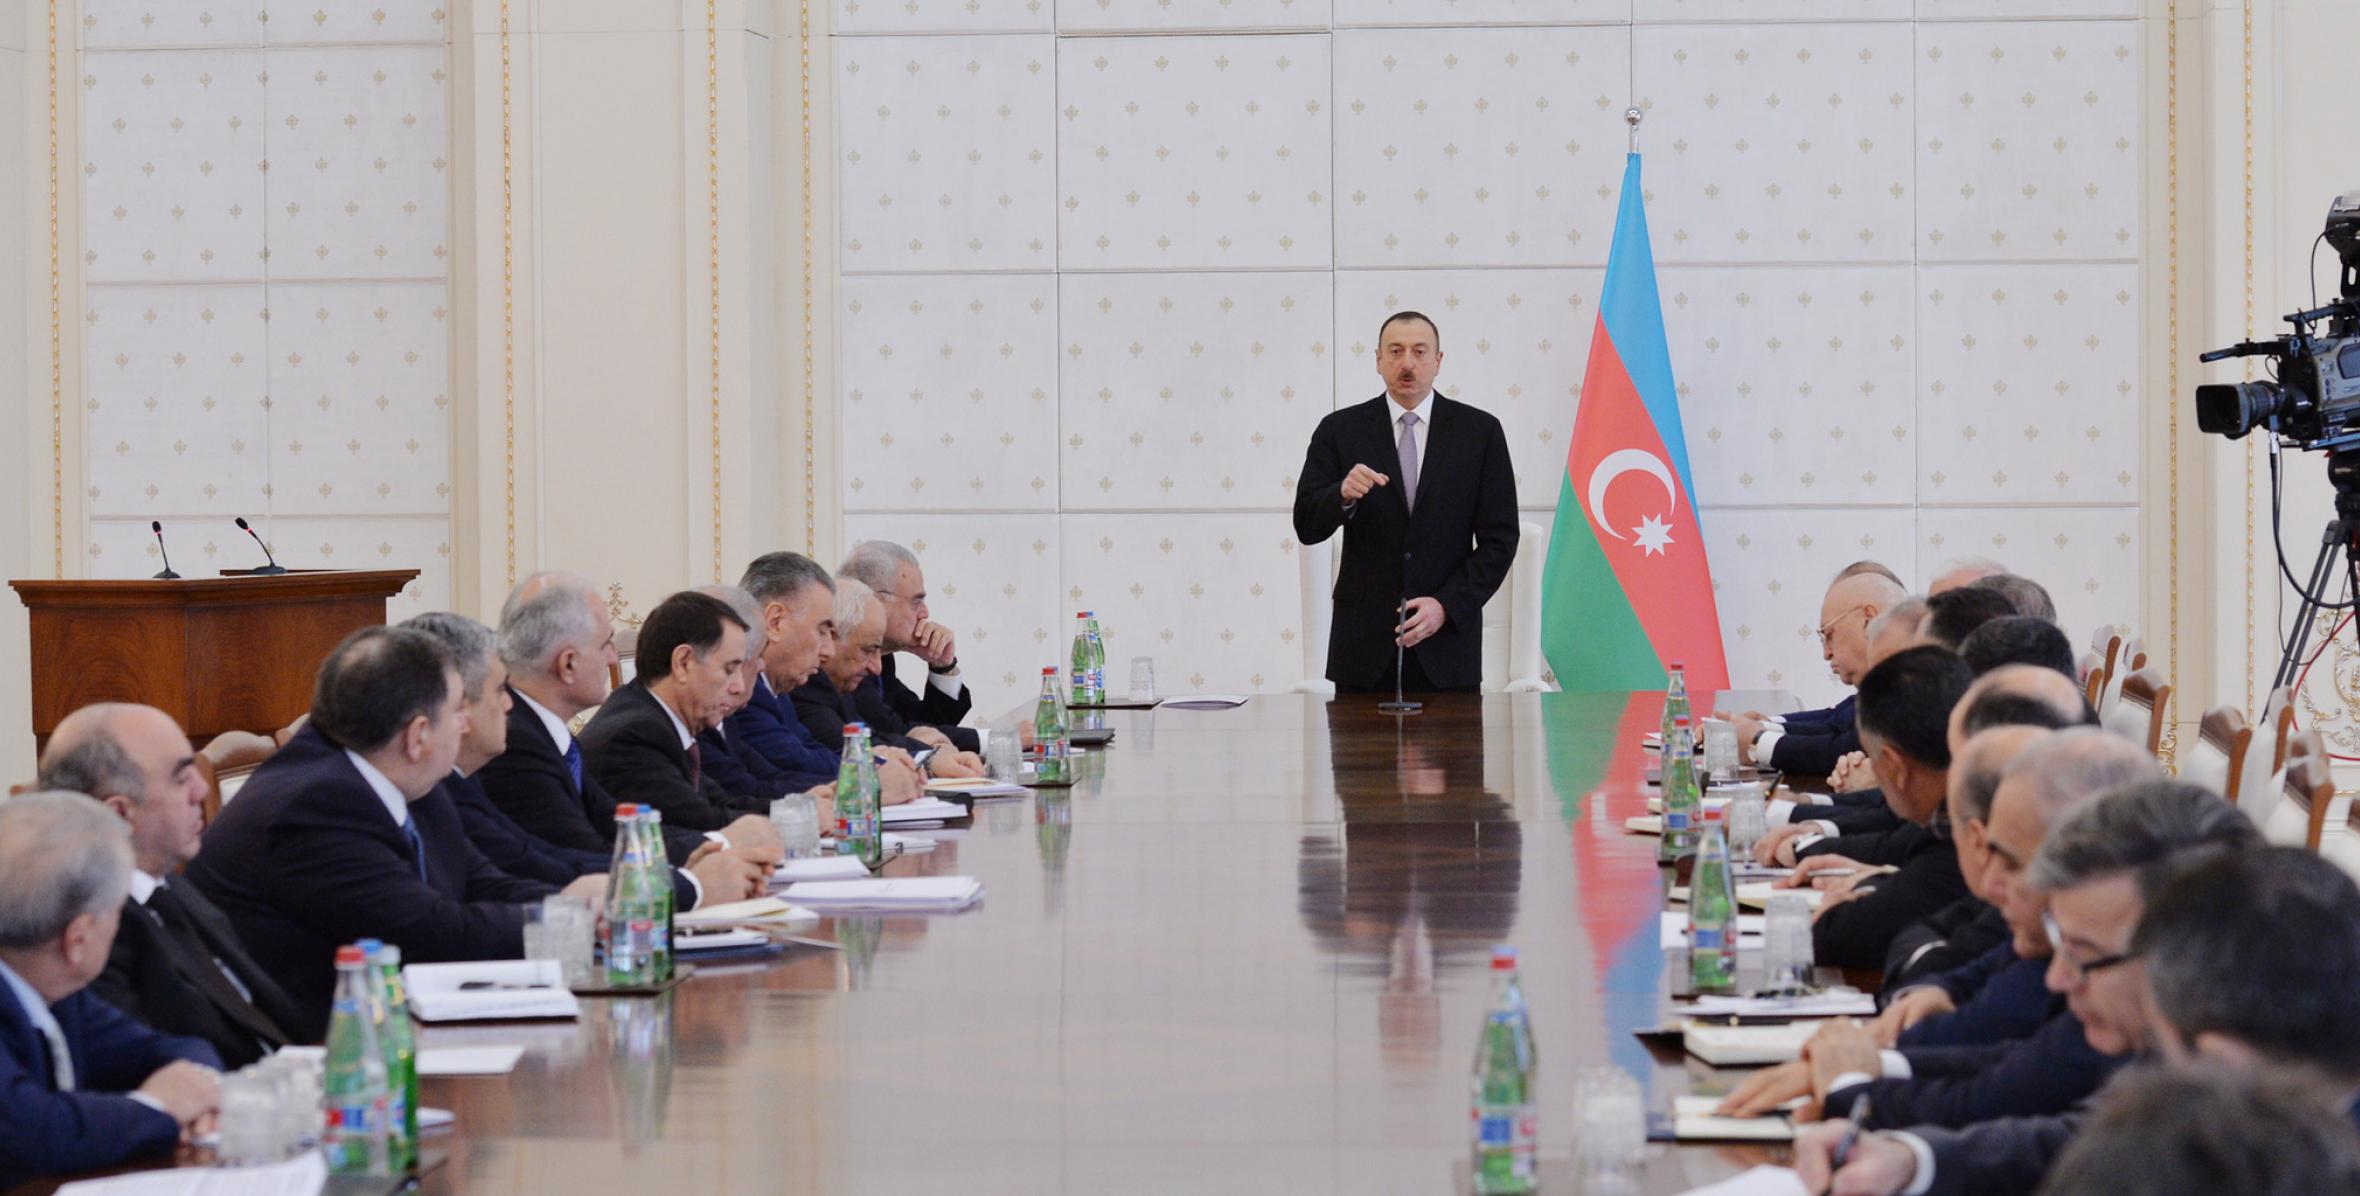 Opening speech by Ilham Aliyev at the meeting of the Cabinet of Ministers dedicated to the results of socioeconomic development in 2014 and objectives for 2015